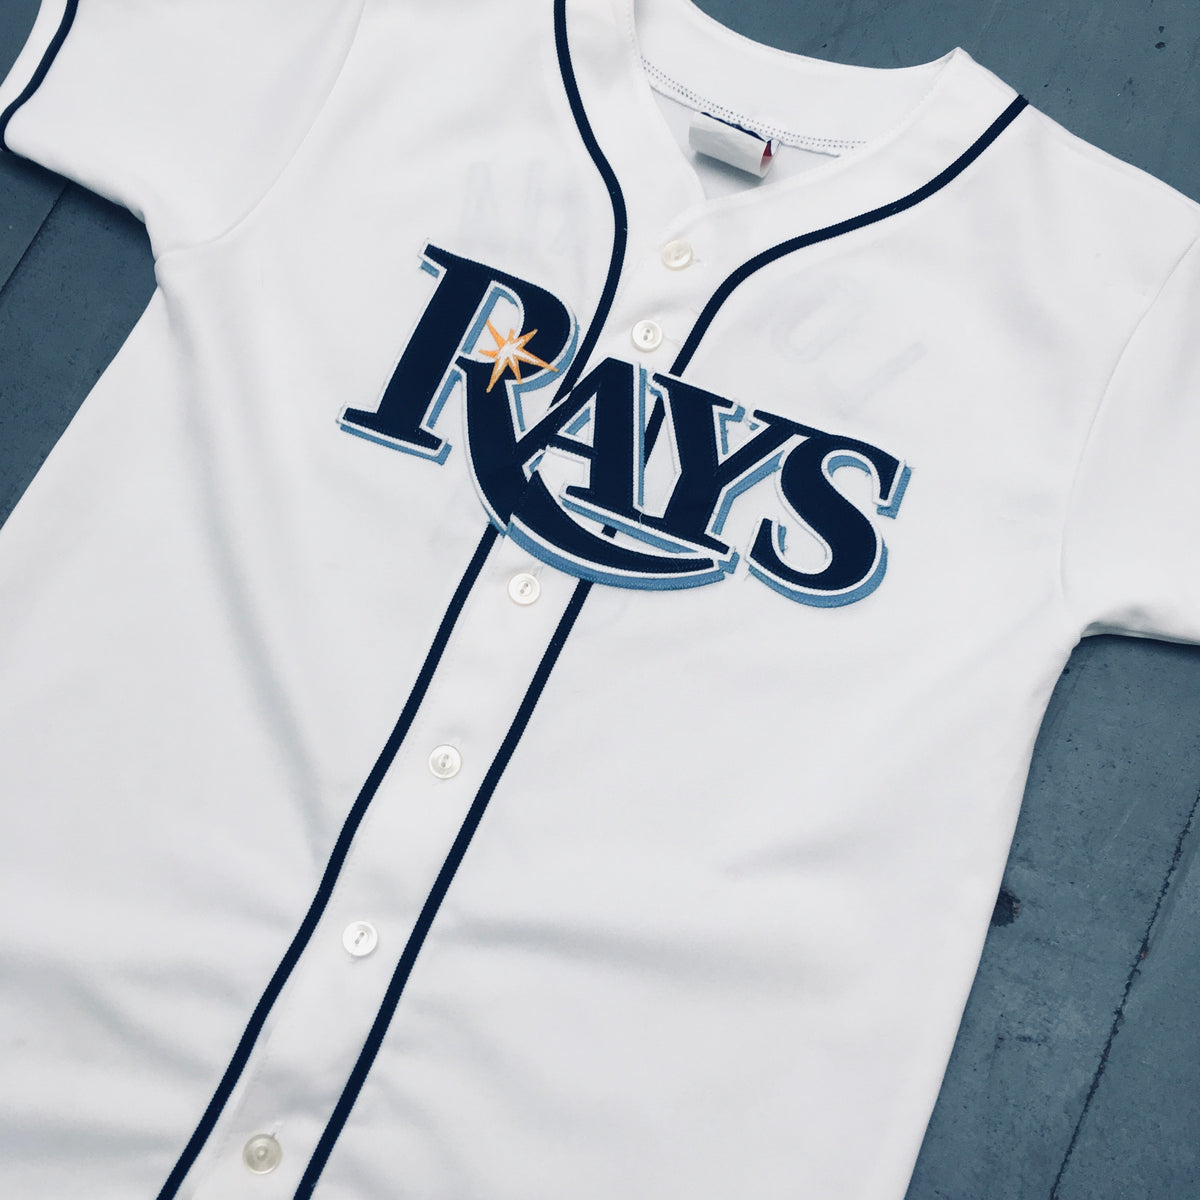 Tampa Bay Rays Authentic and Replica Baseball Jerseys